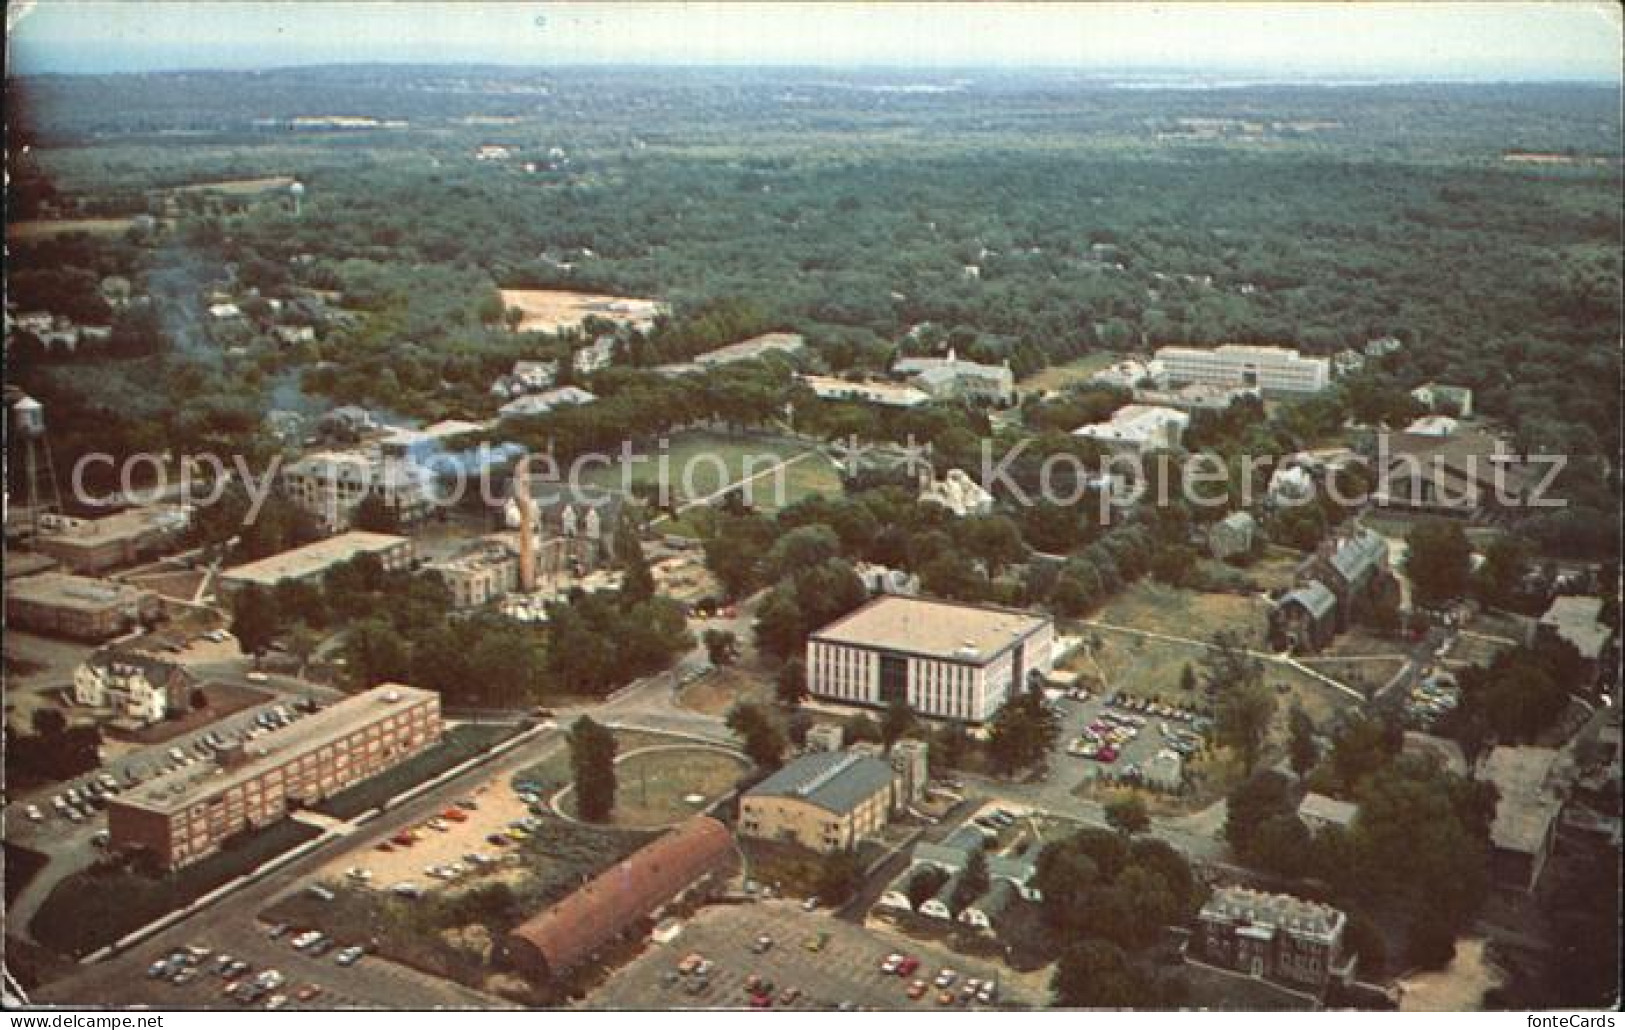 72463990 Rhode_Island_US-State Air View Of The University Of Rhode Island - Otros & Sin Clasificación